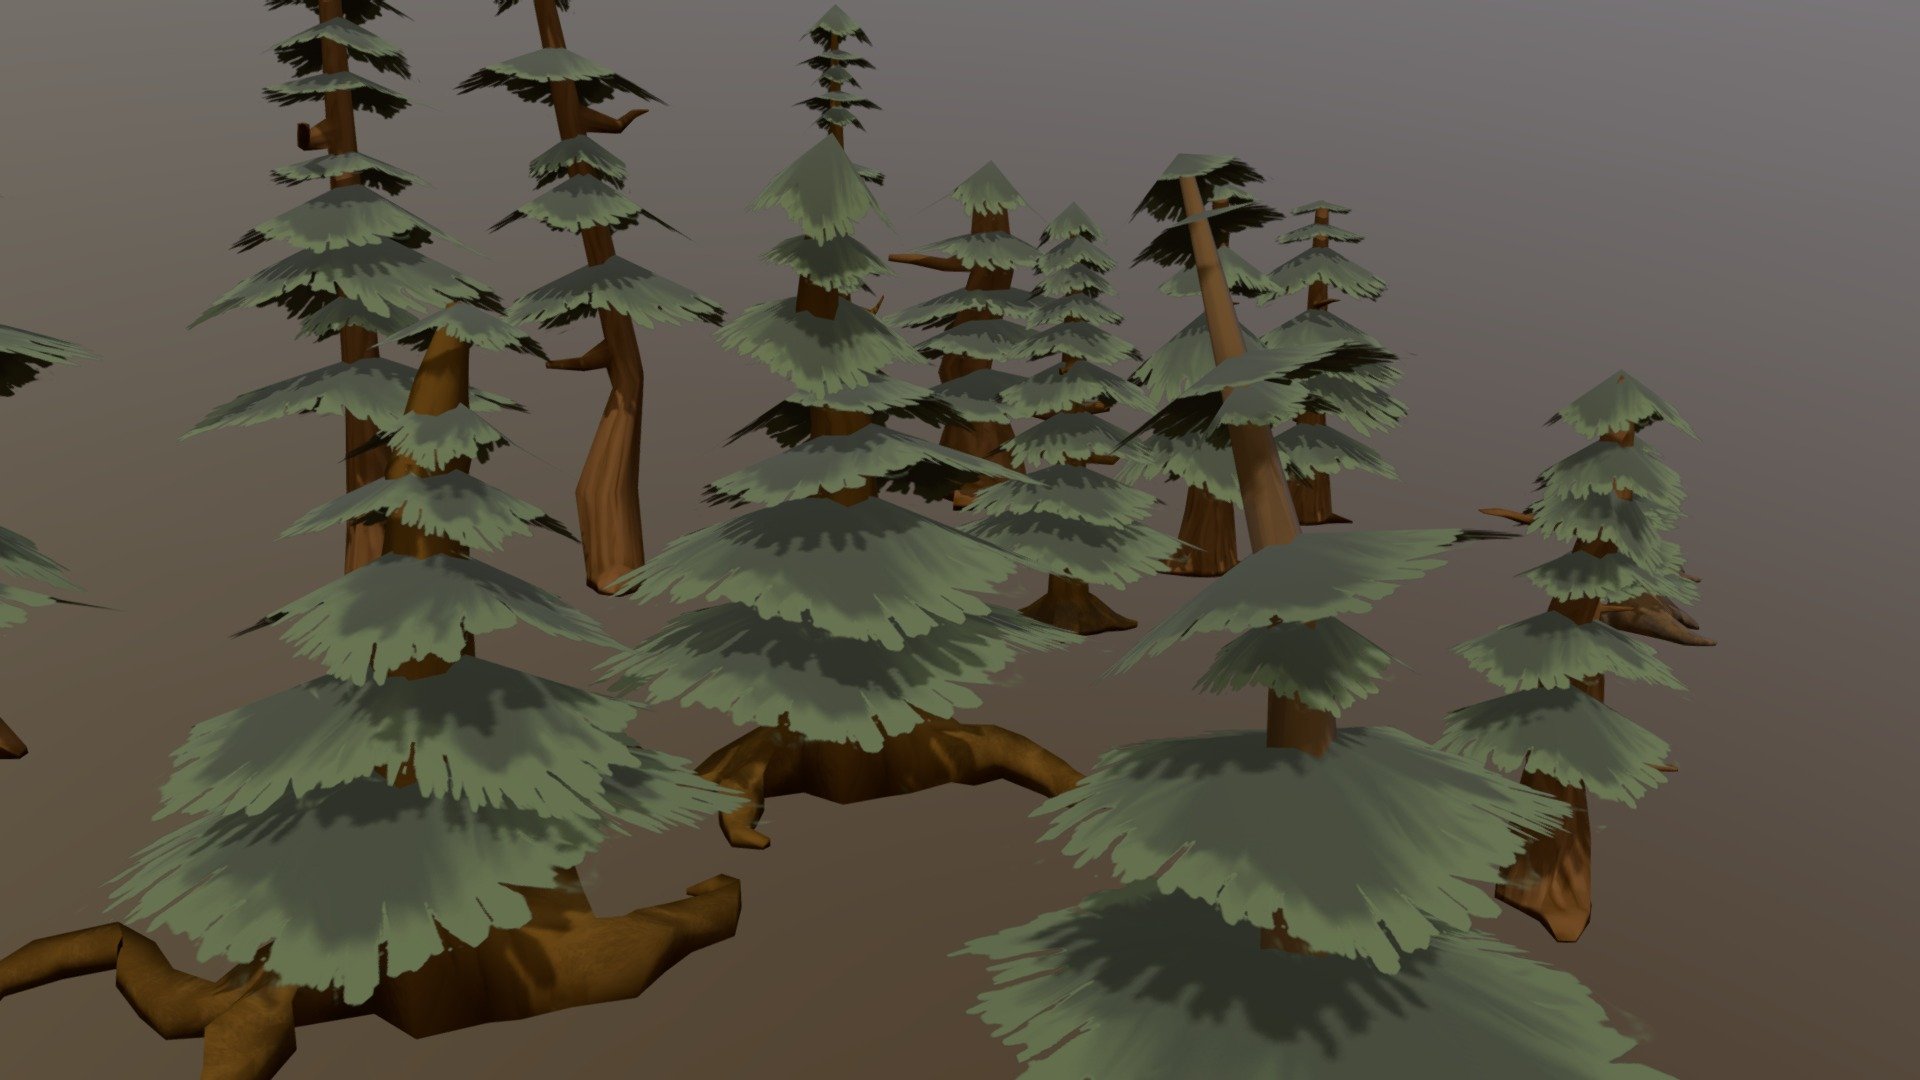 Working on tunring this into an asset pack once I get approved for sale want to make more things like this - Forest asset pack - 3D model by Log_bear 3d model